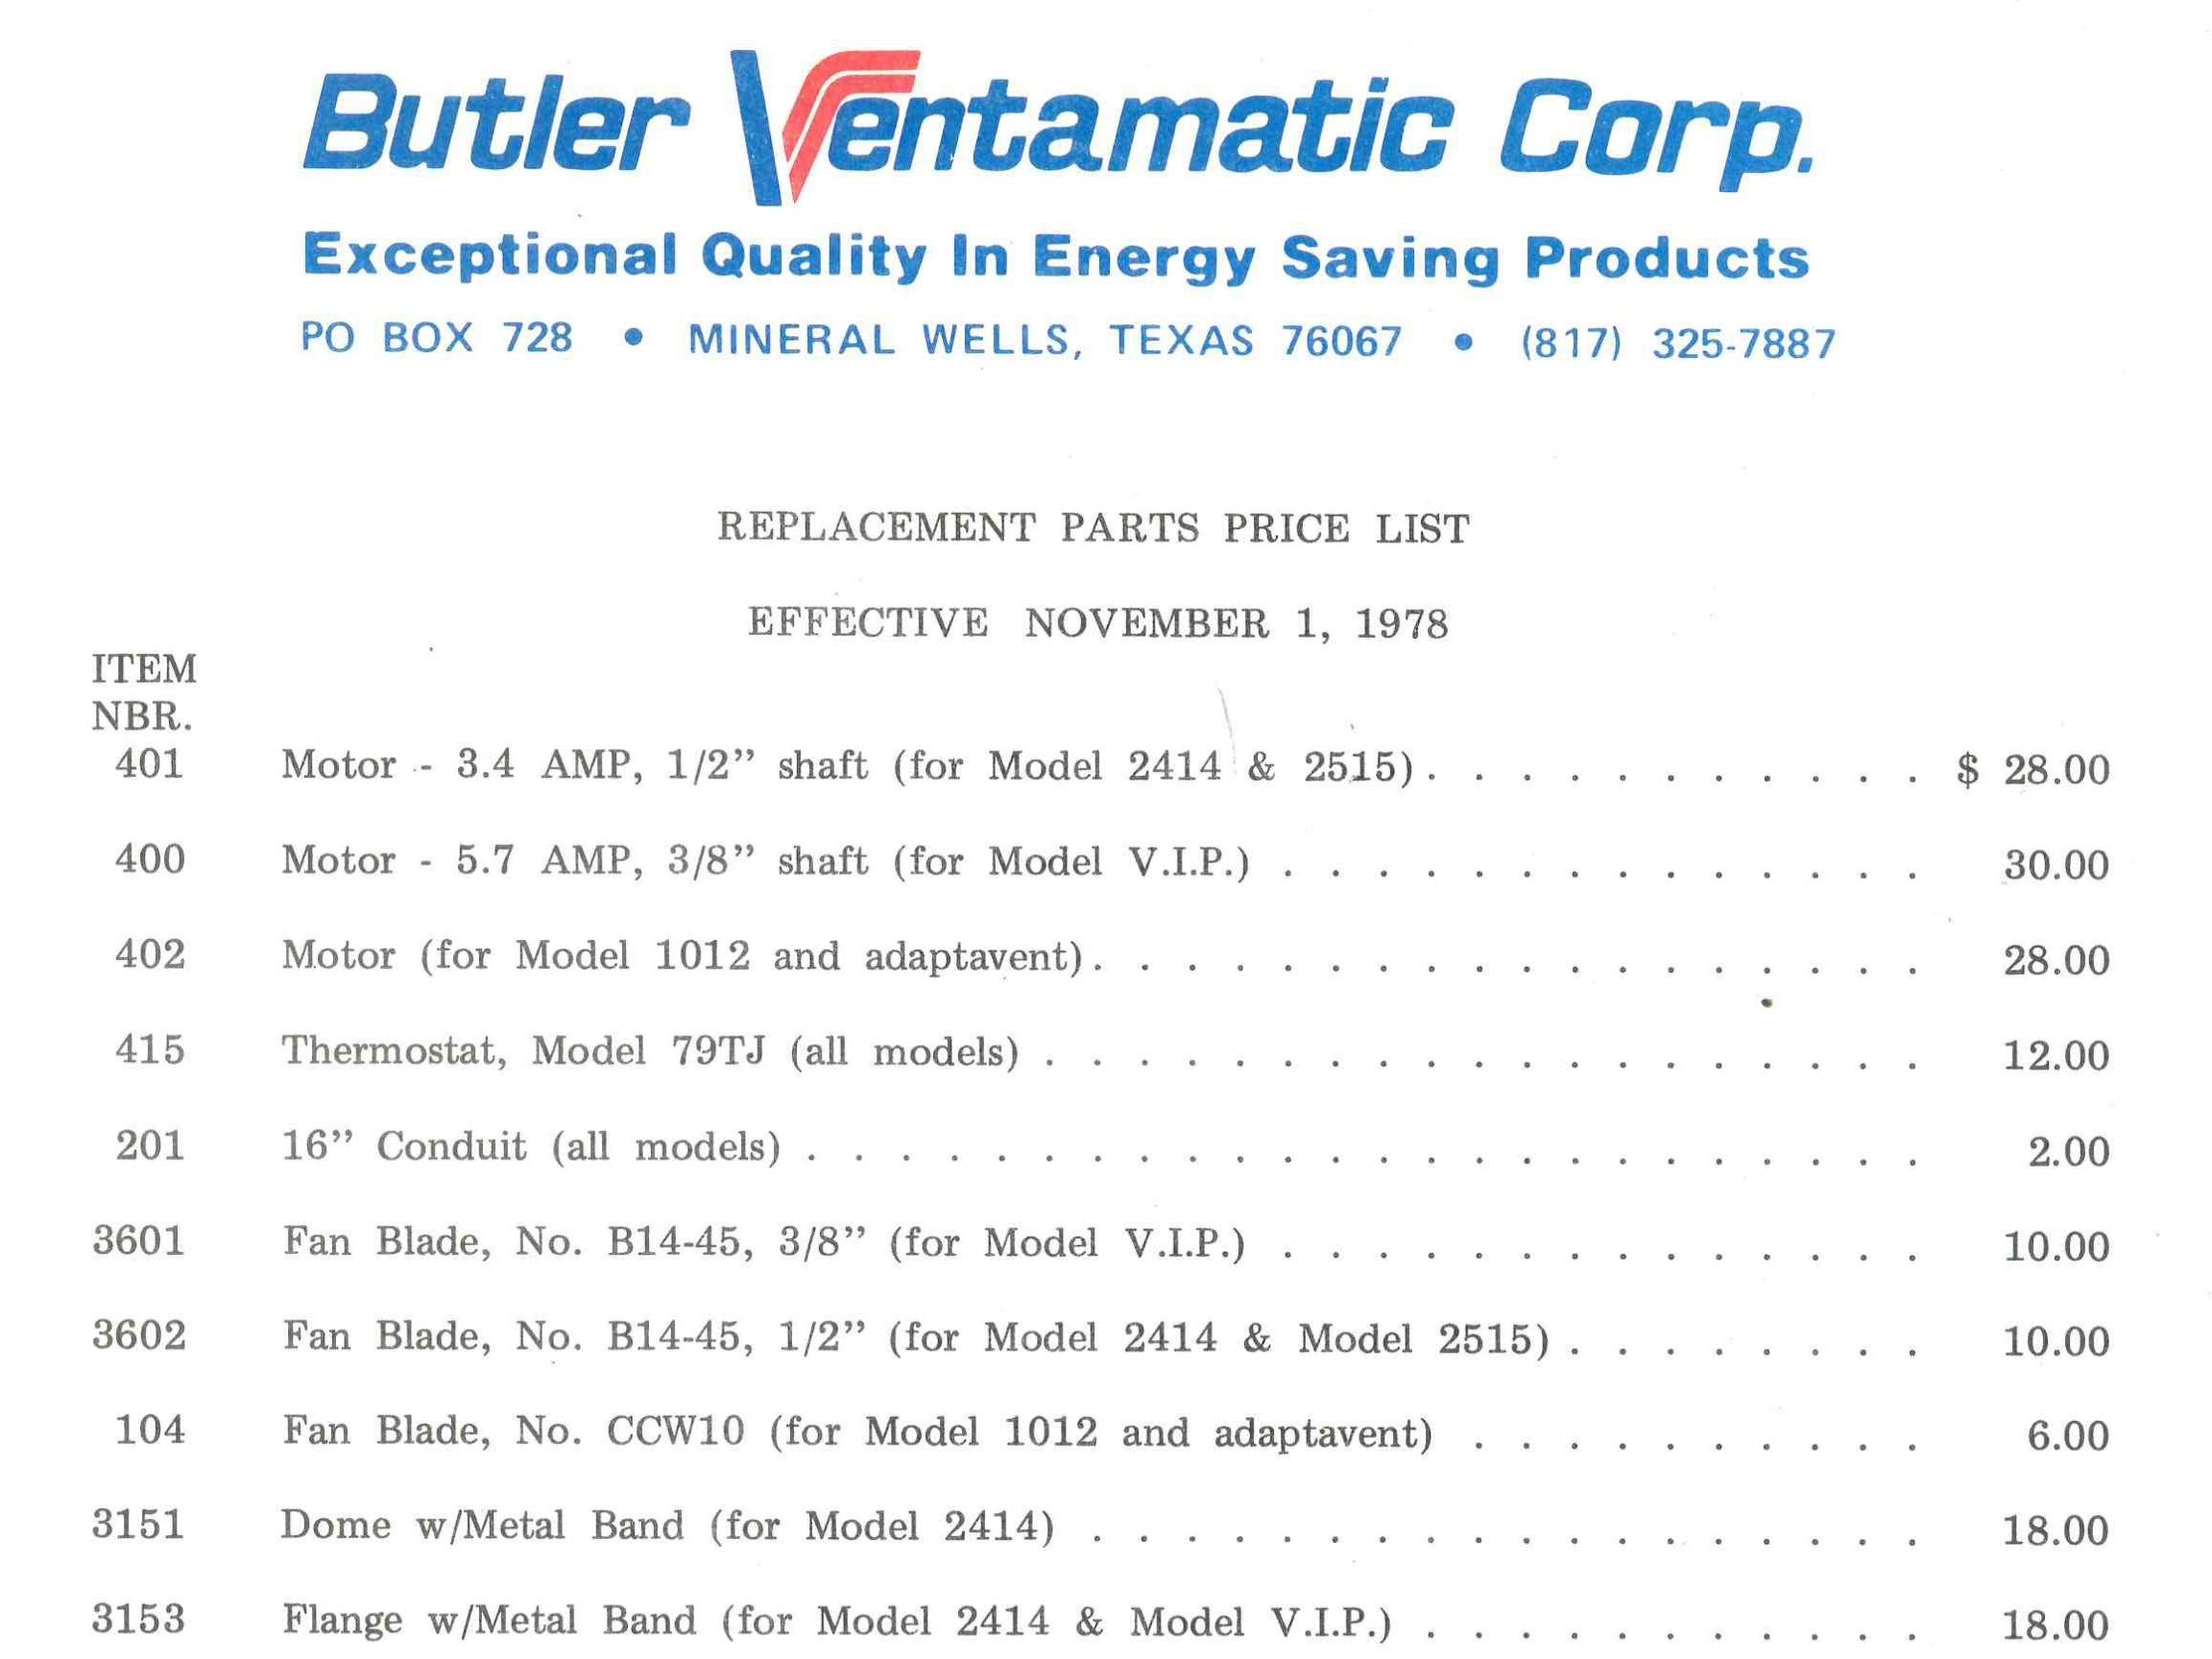 A catalog from 1978 showing the prices of replacement parts and components for Butler Ventamatic products.